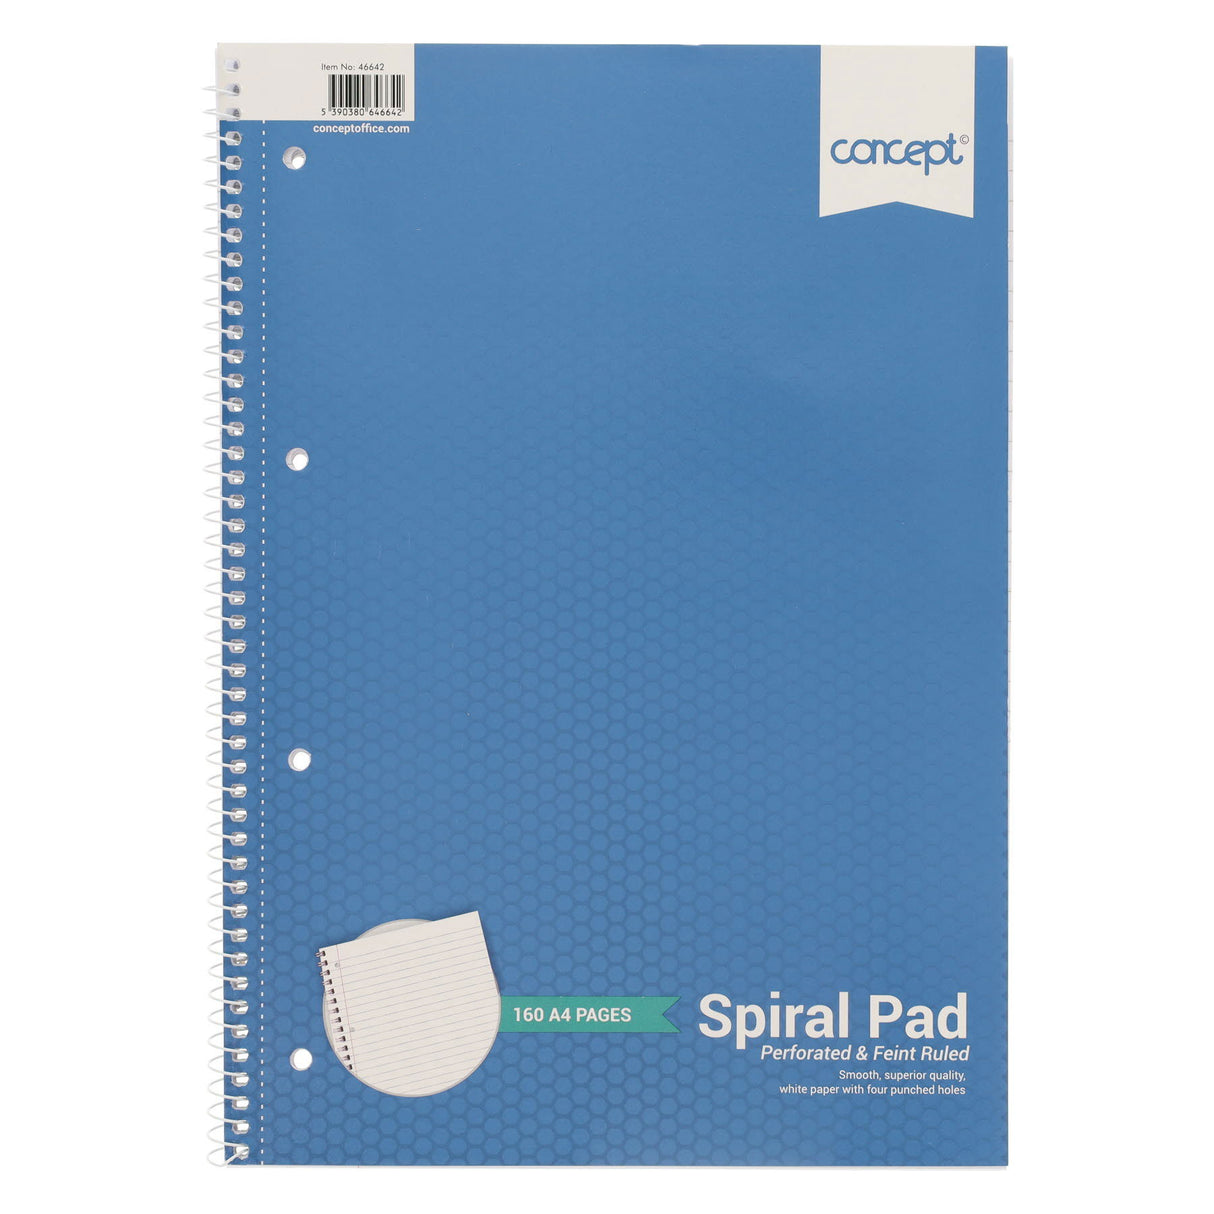 Concept A4 Spiral Notebook - 160 Pages